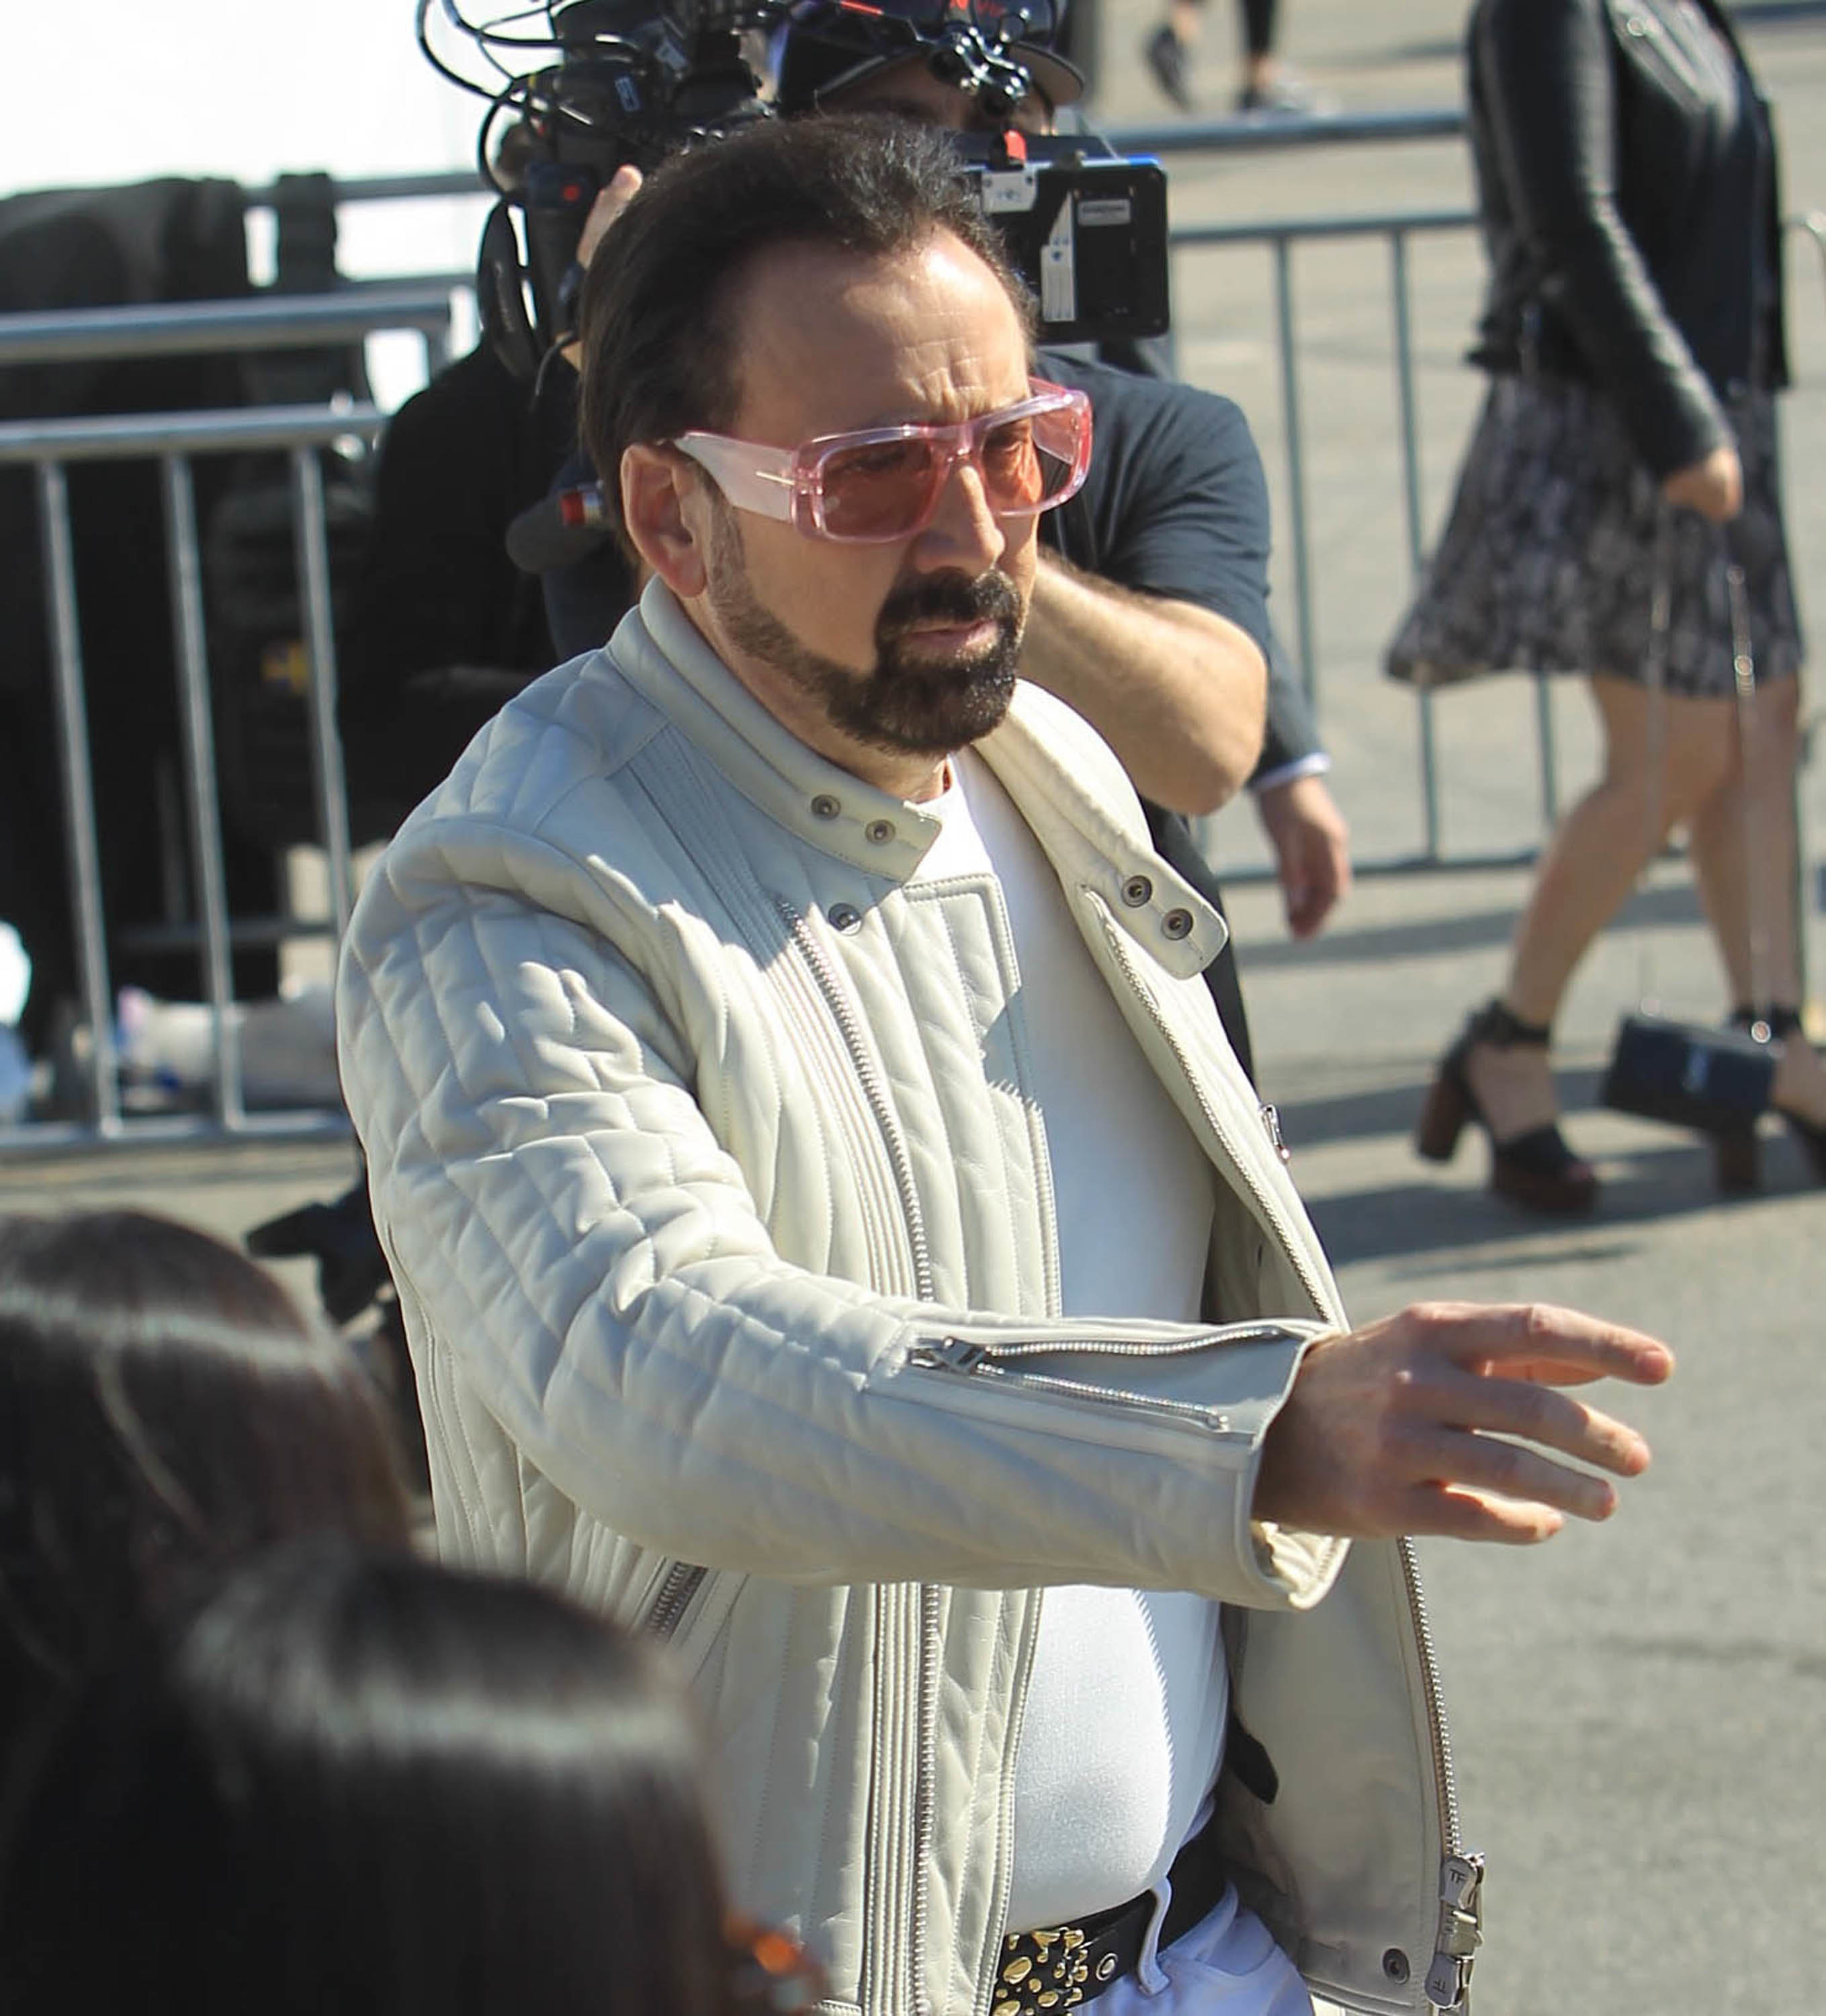 Cage extends his arm while wearing a jacket and sunglasses